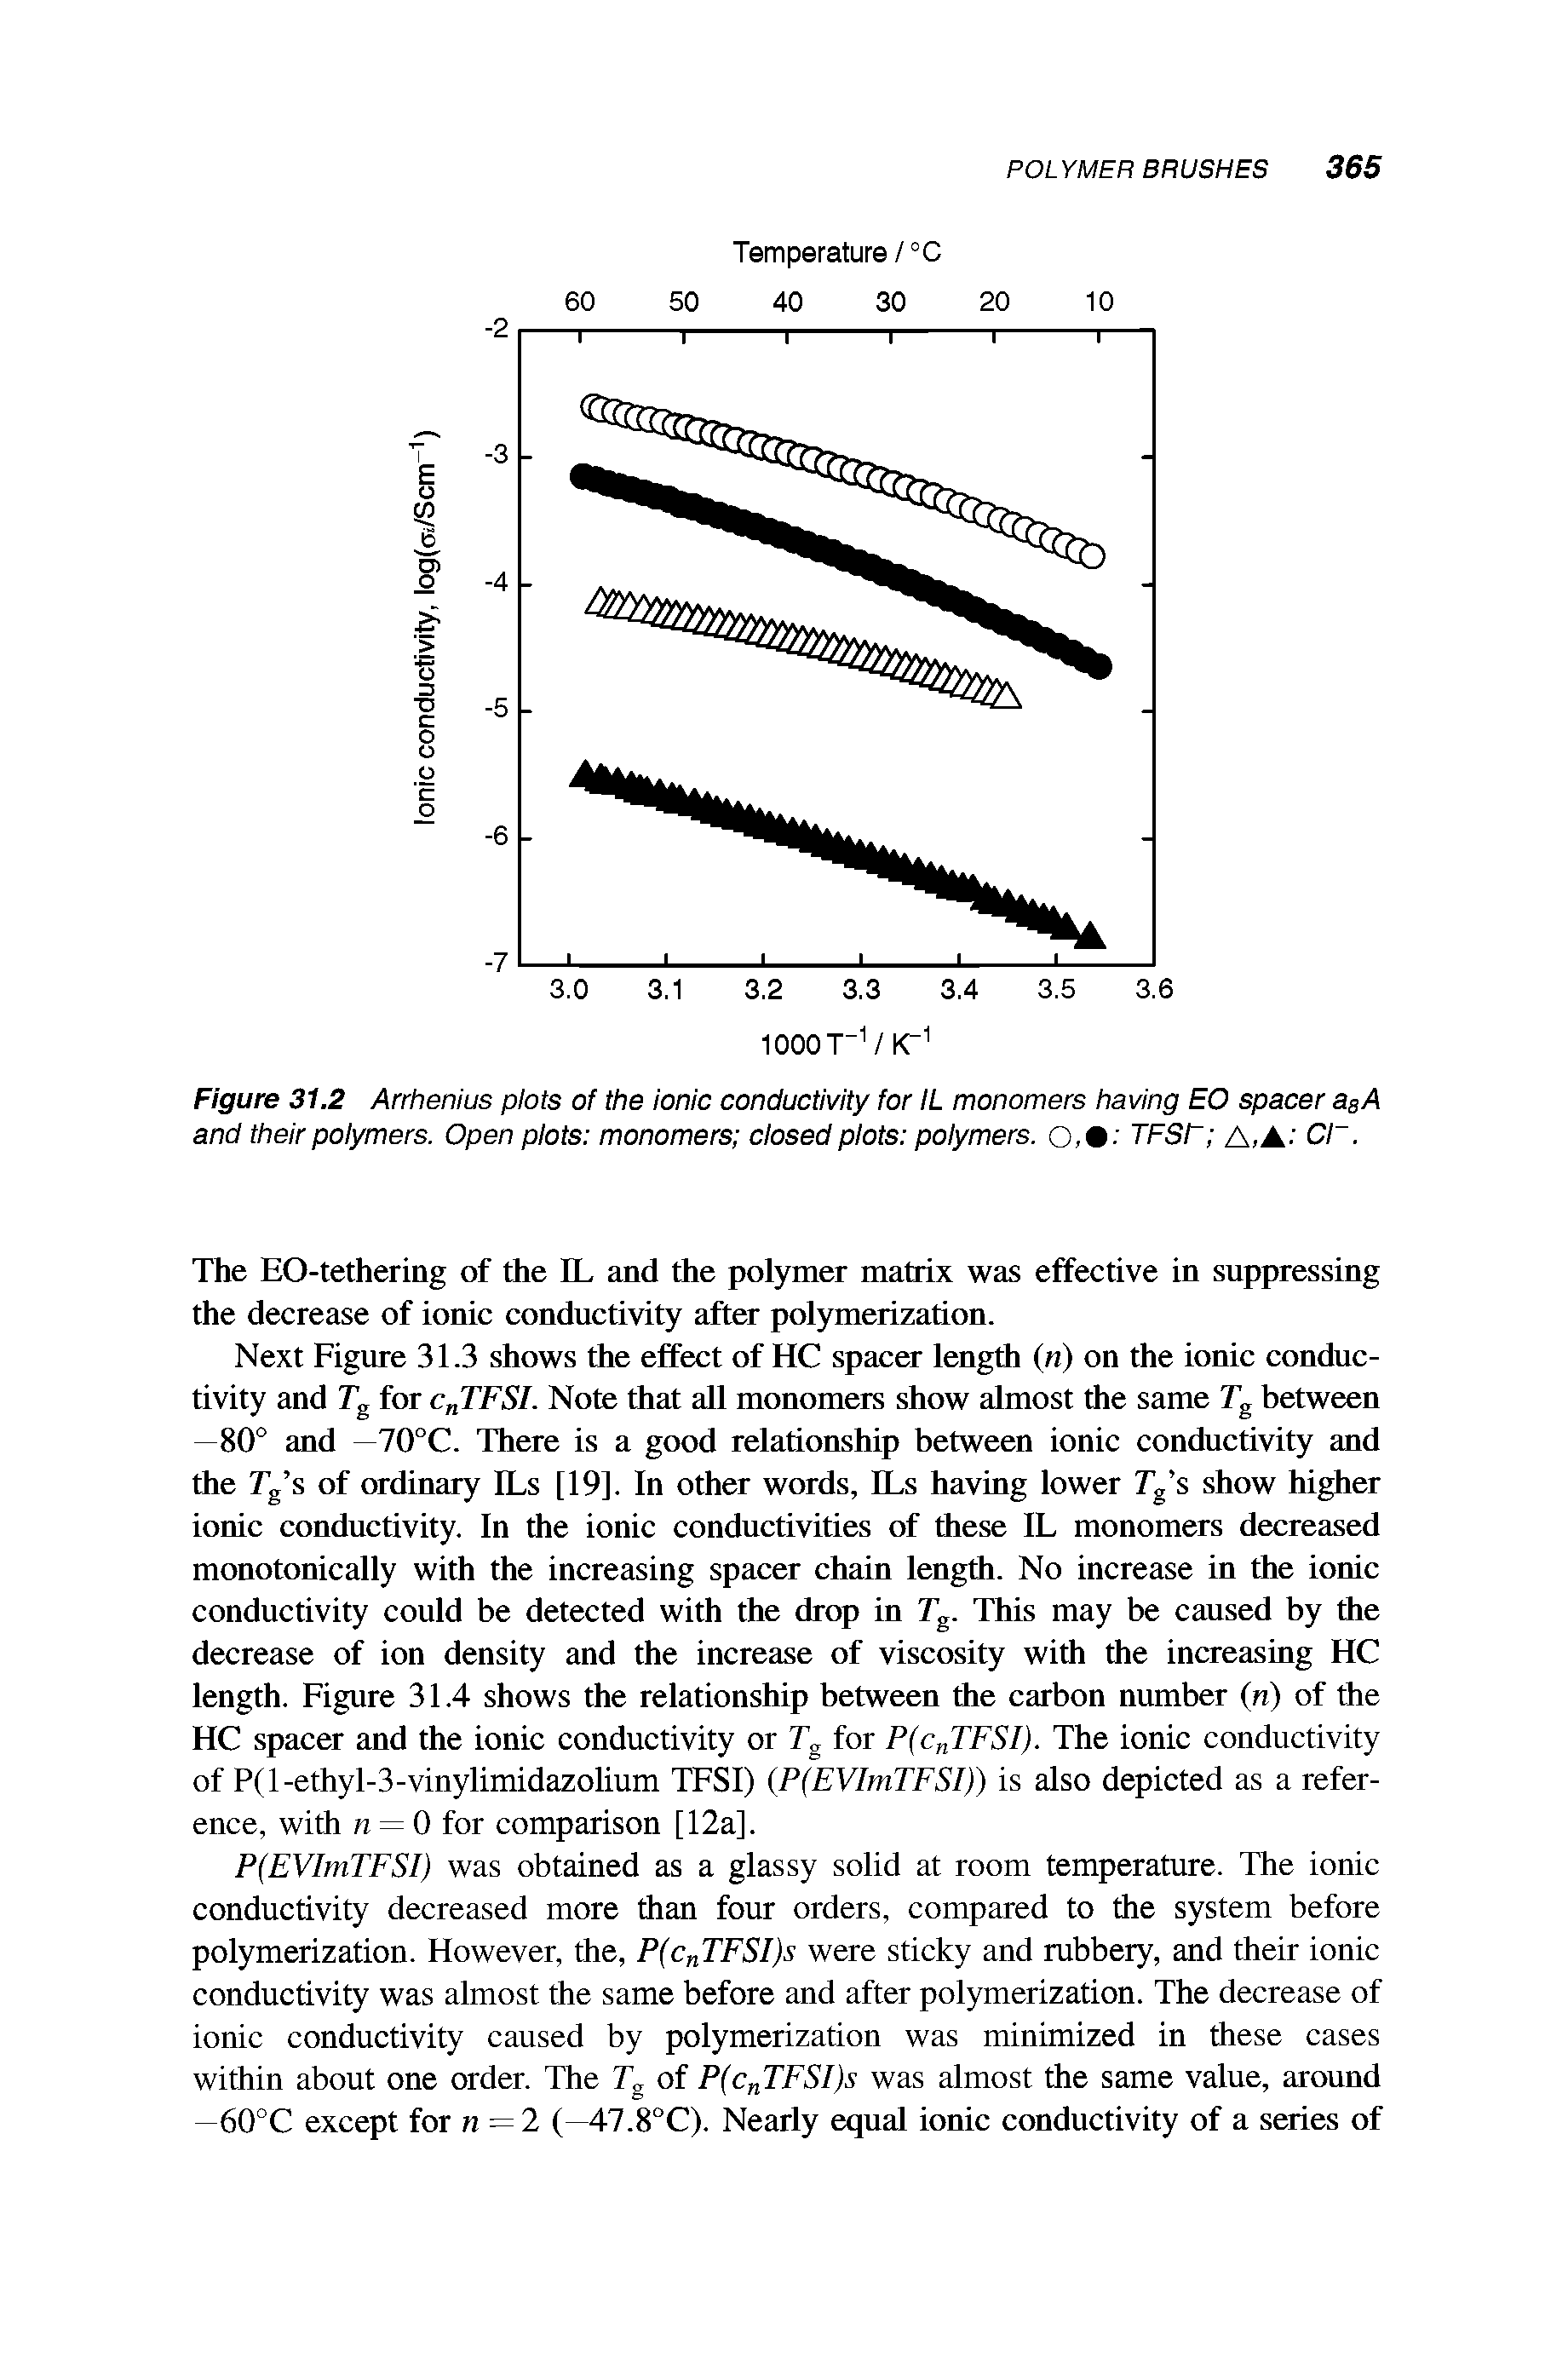 Figure 31.2 Arrhenius plots of the ionic conductivity for IL monomers having EO spacer agA and their polymers. Open plots monomers closed plots polymers. 0,% TFSI A,A Cl. ...